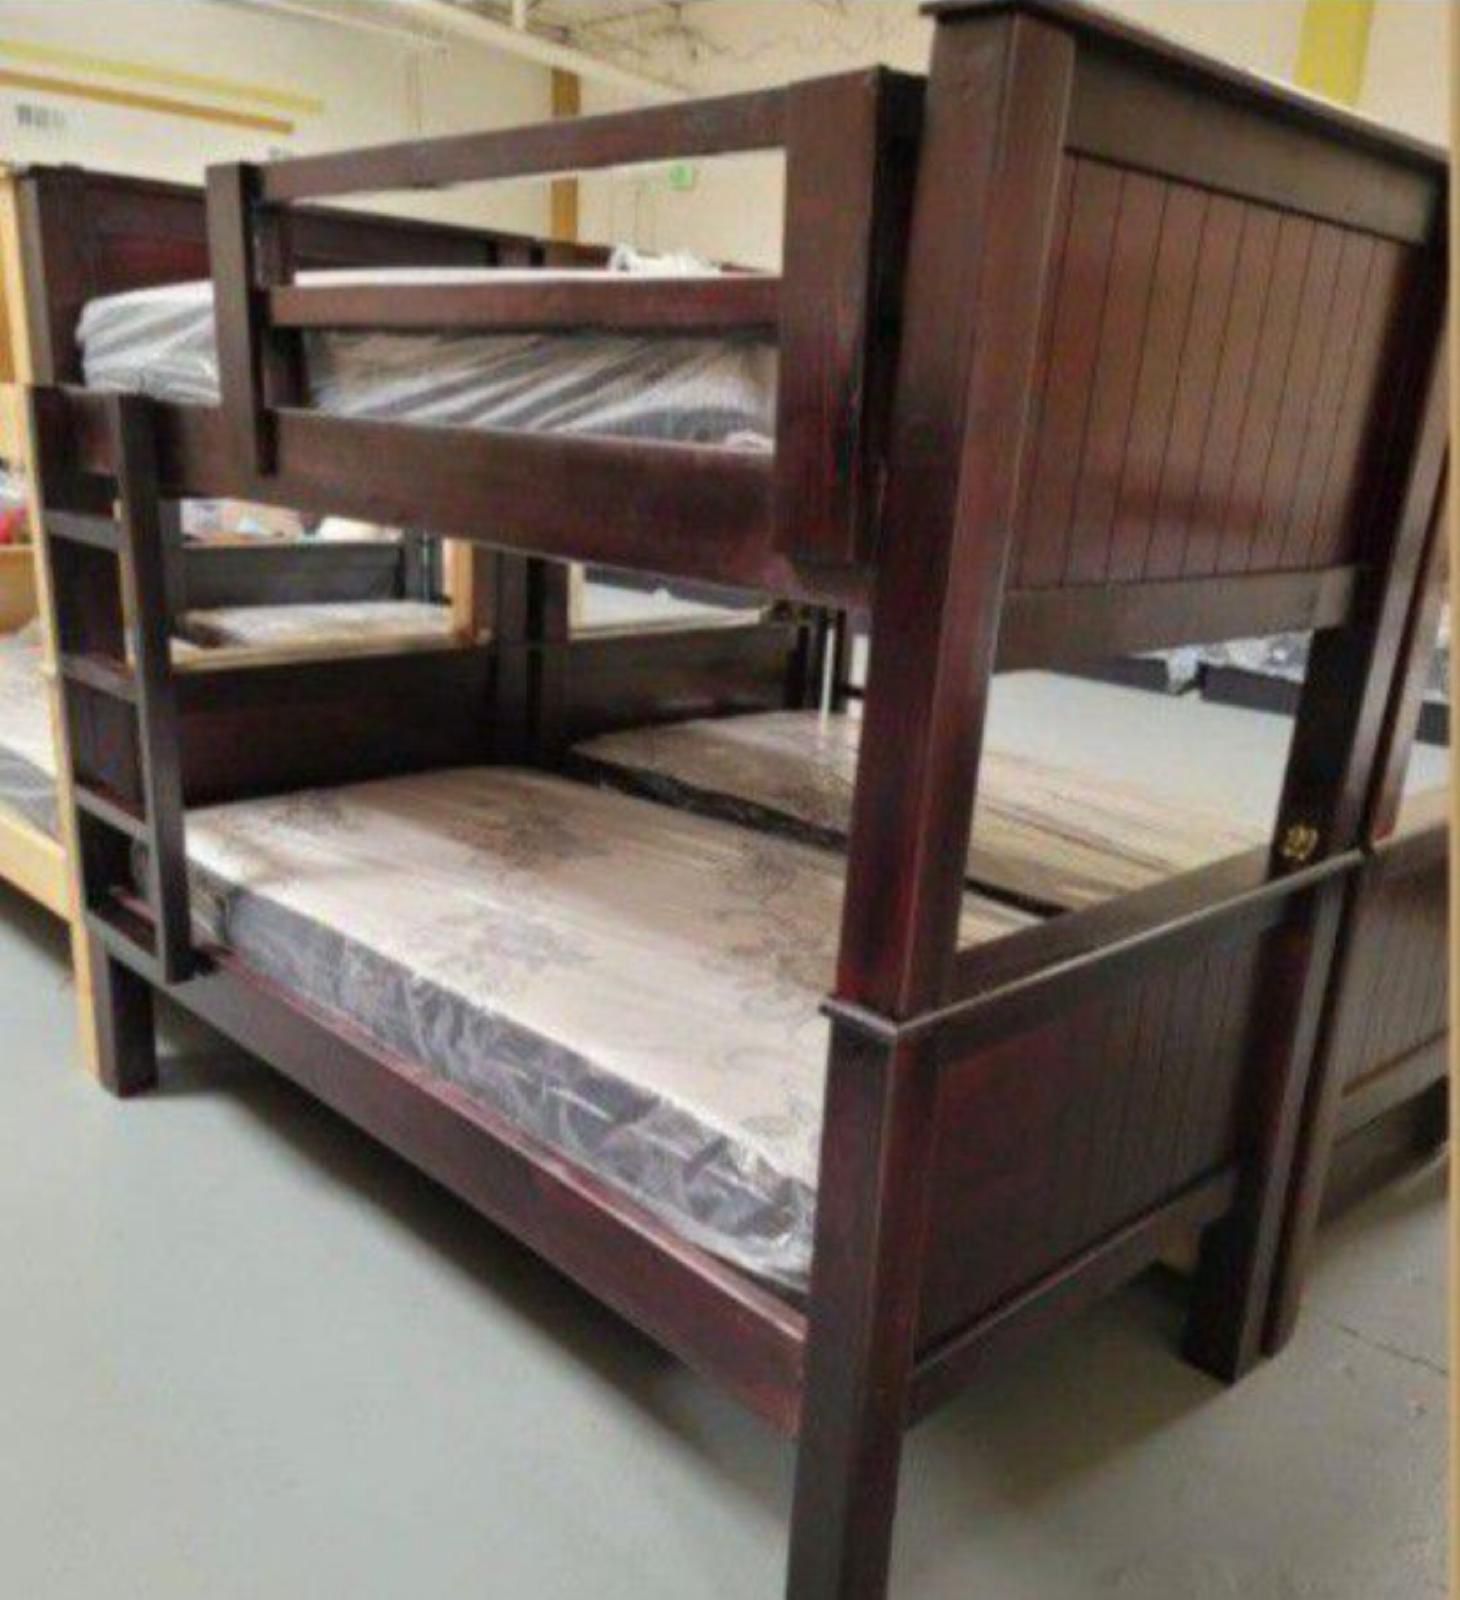 Bunk Bed Twin-Twin Mattress Included 